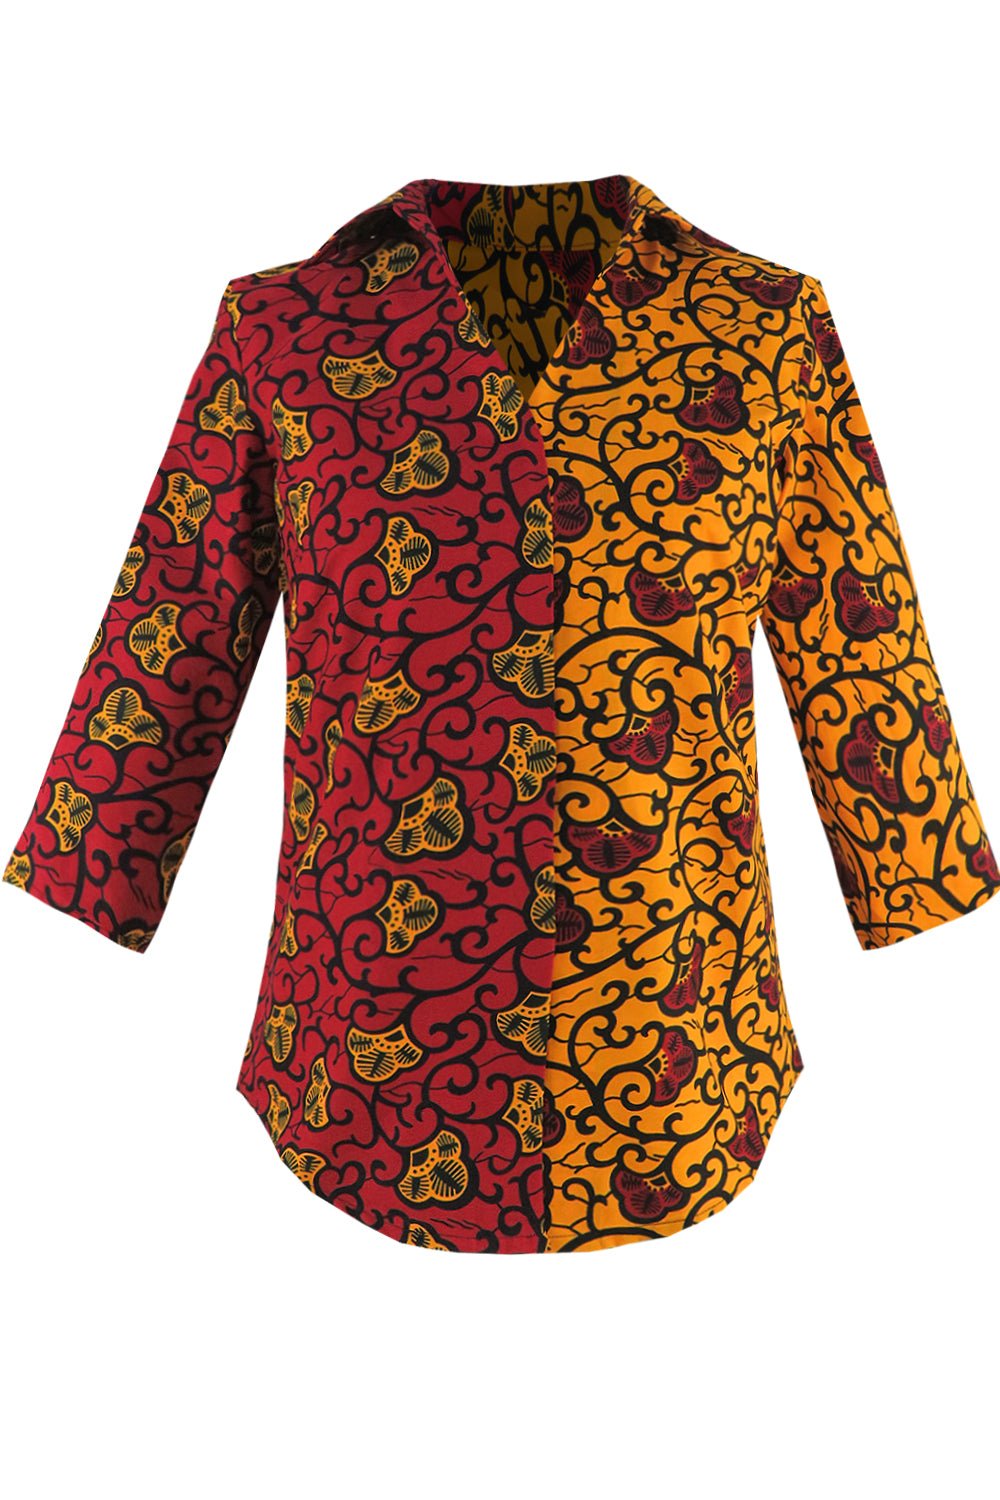 African Print Women's Shirt – Chic Style Refinement